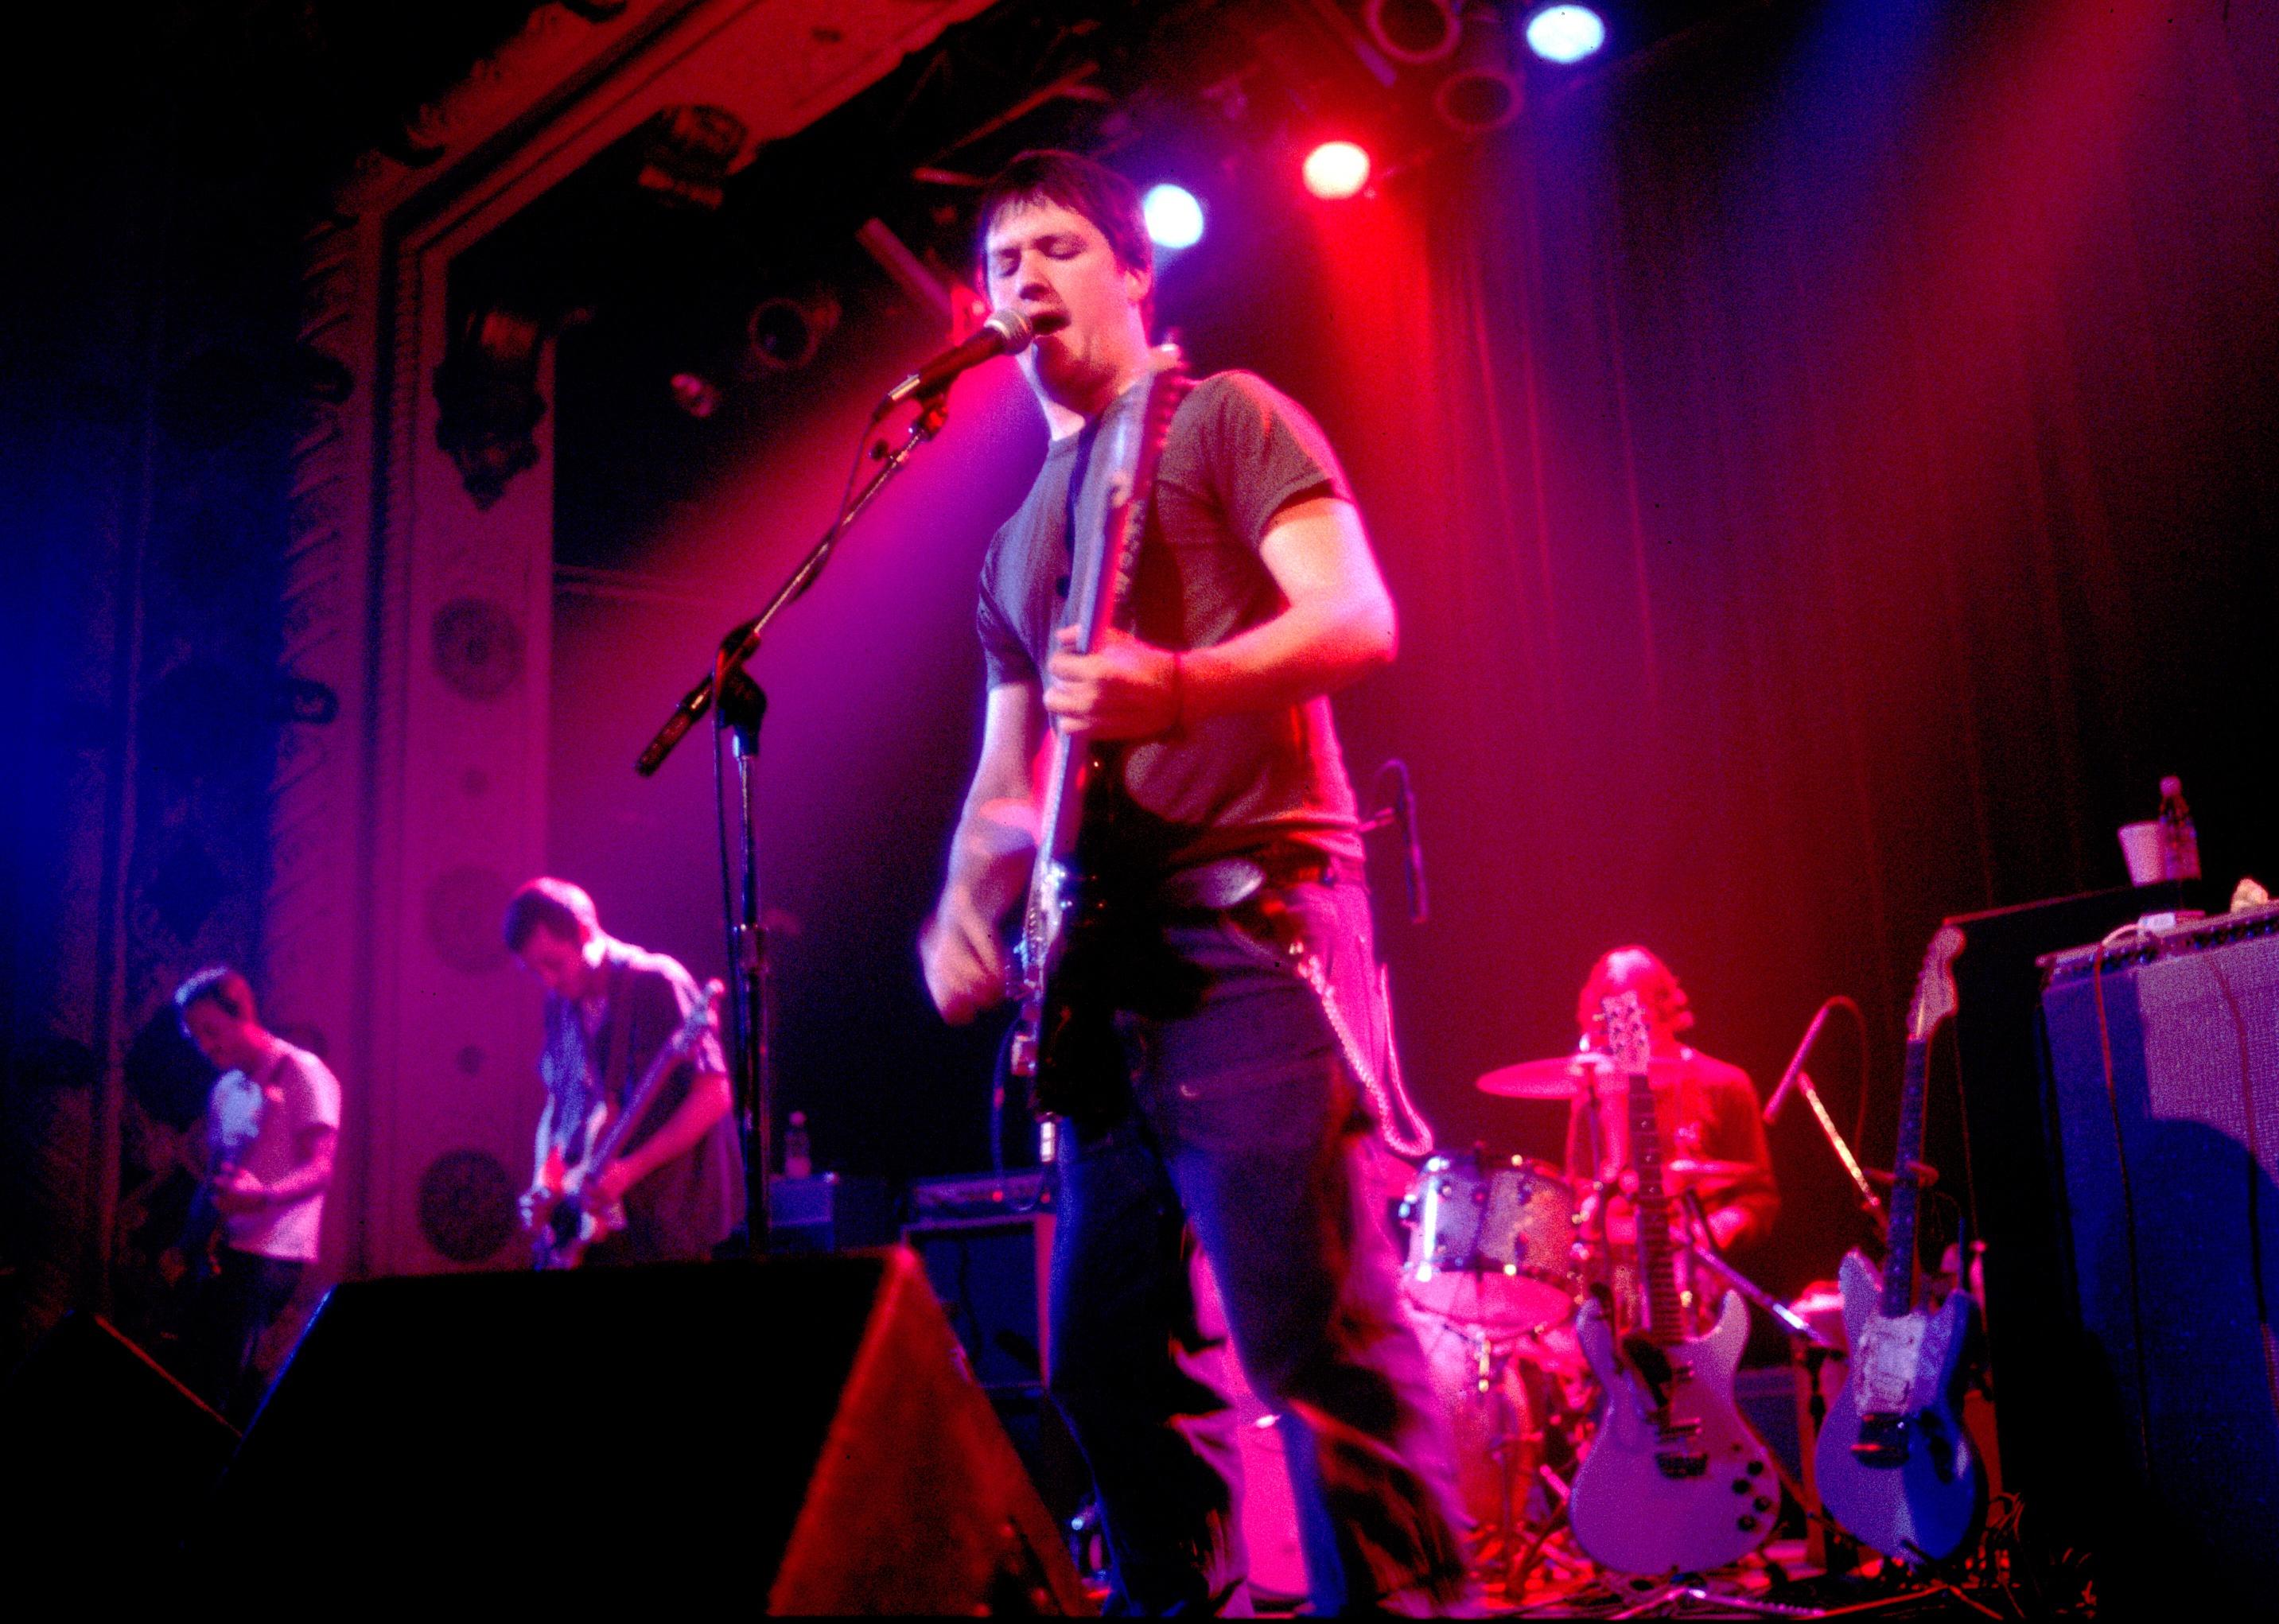 Modest Mouse perform at a concert